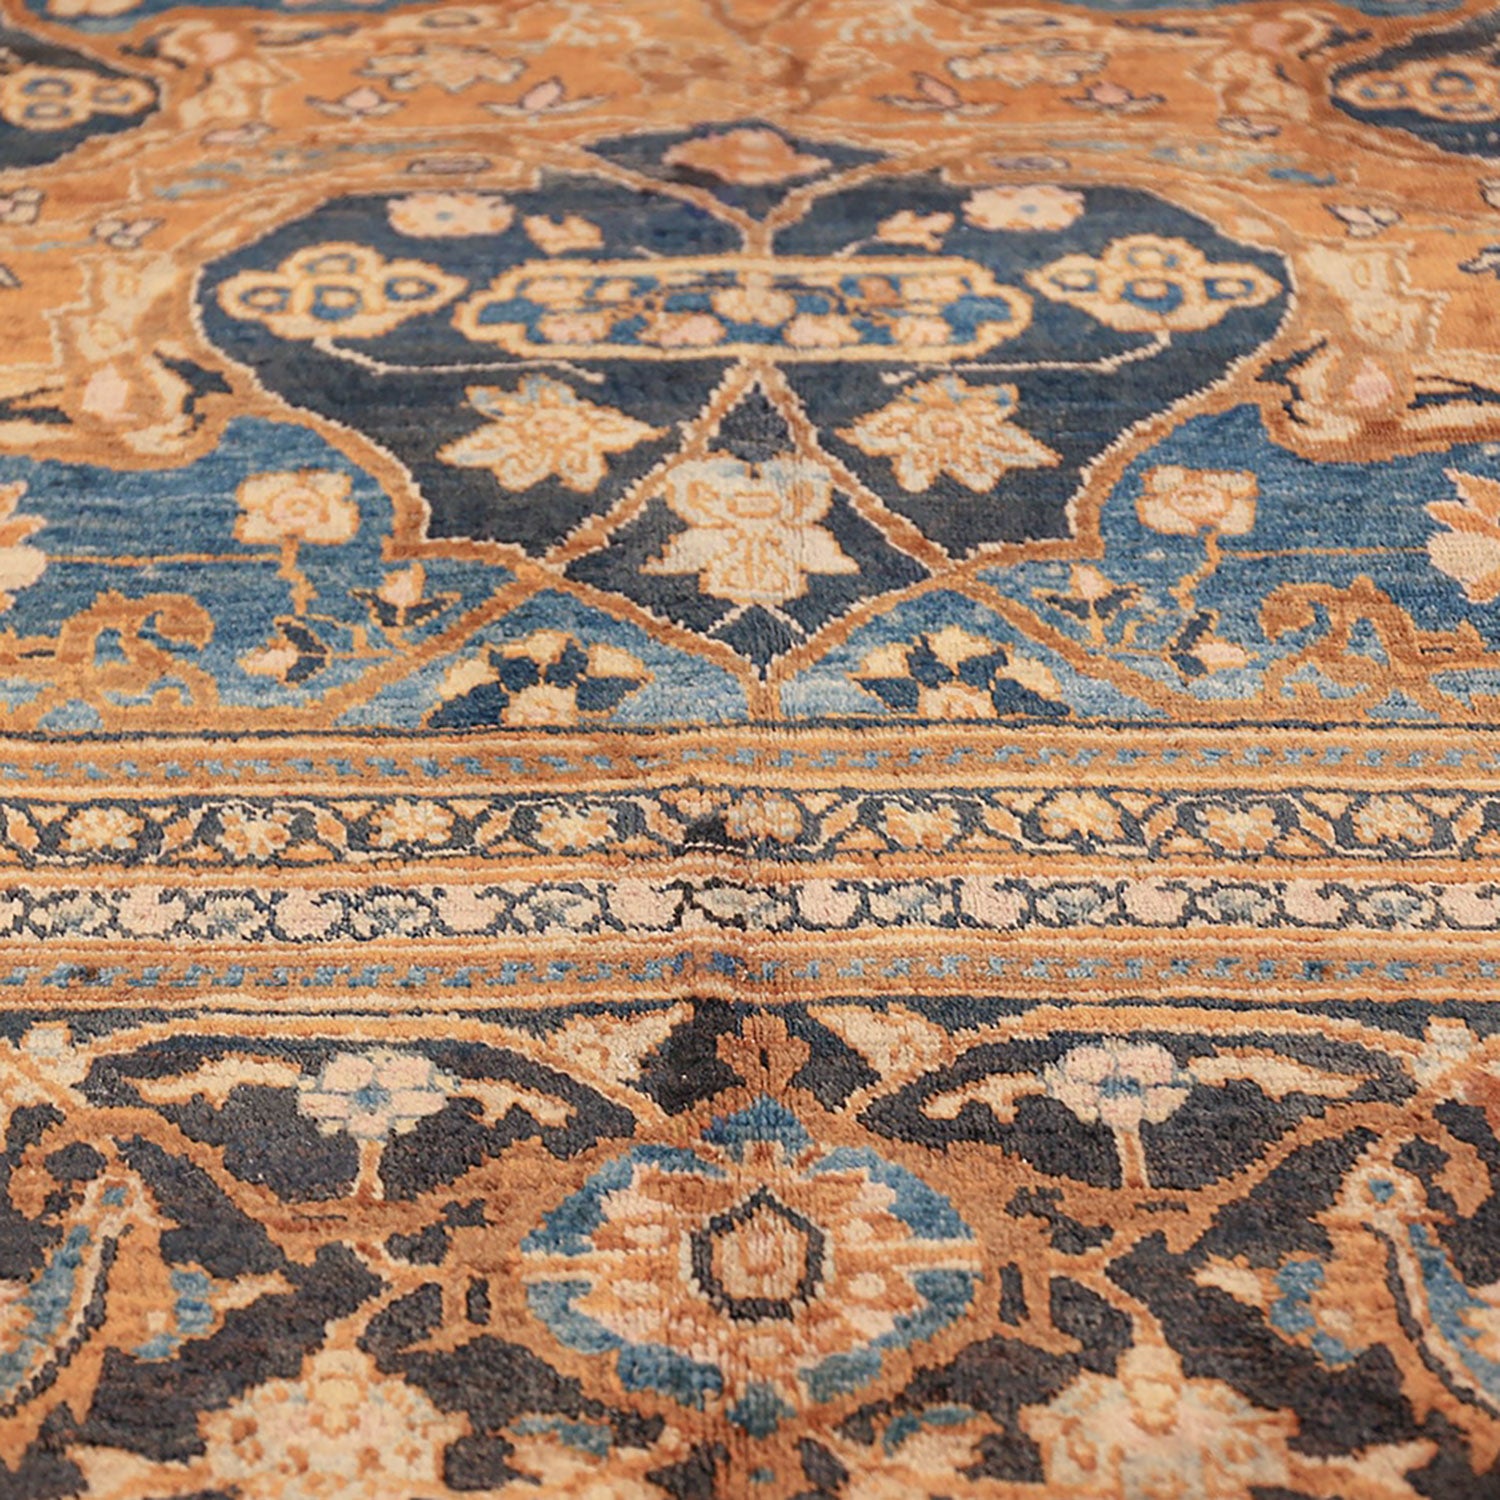 Exquisite handmade rug with intricate geometric and floral motifs